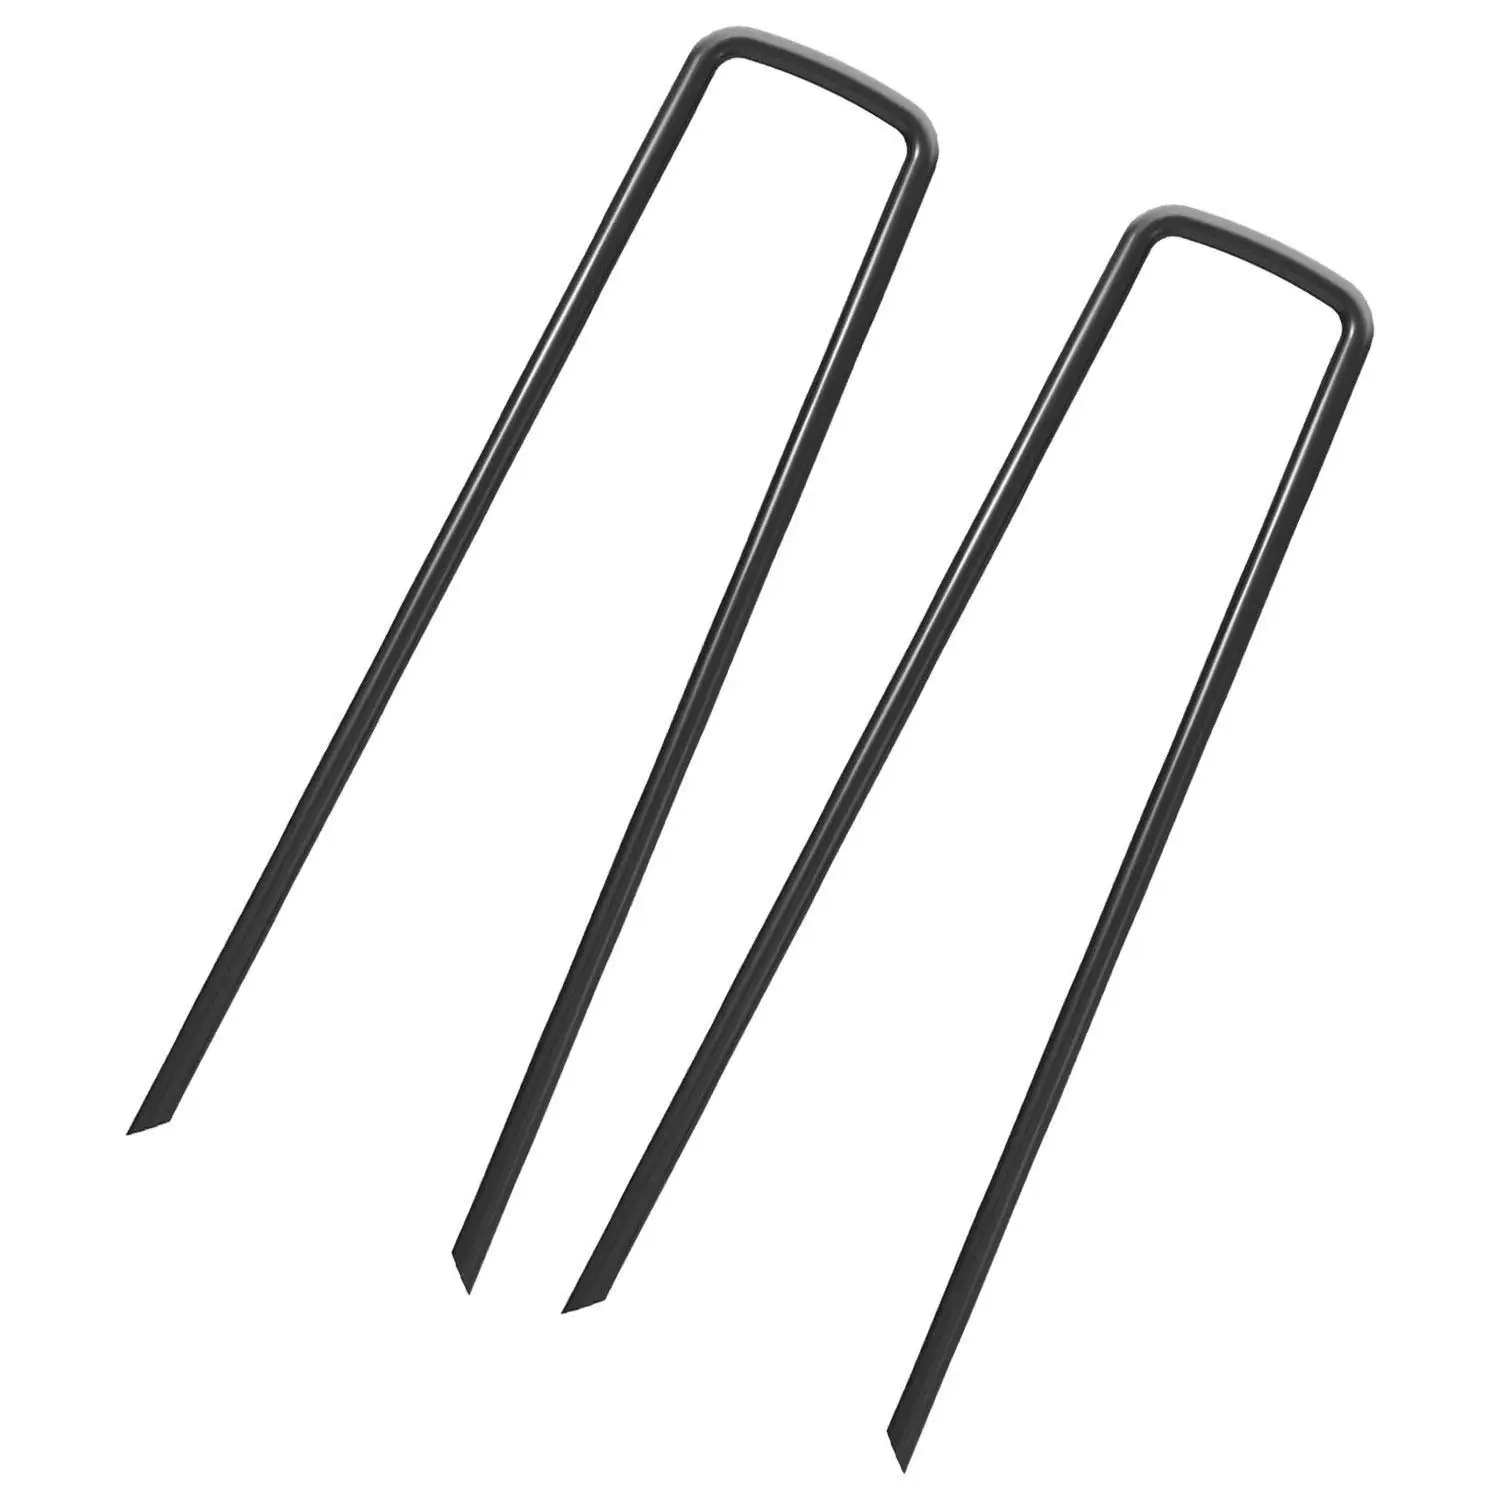 1000-Pack Hanes Geo Components 85873 Sod Staples 6-Inch Fence ...